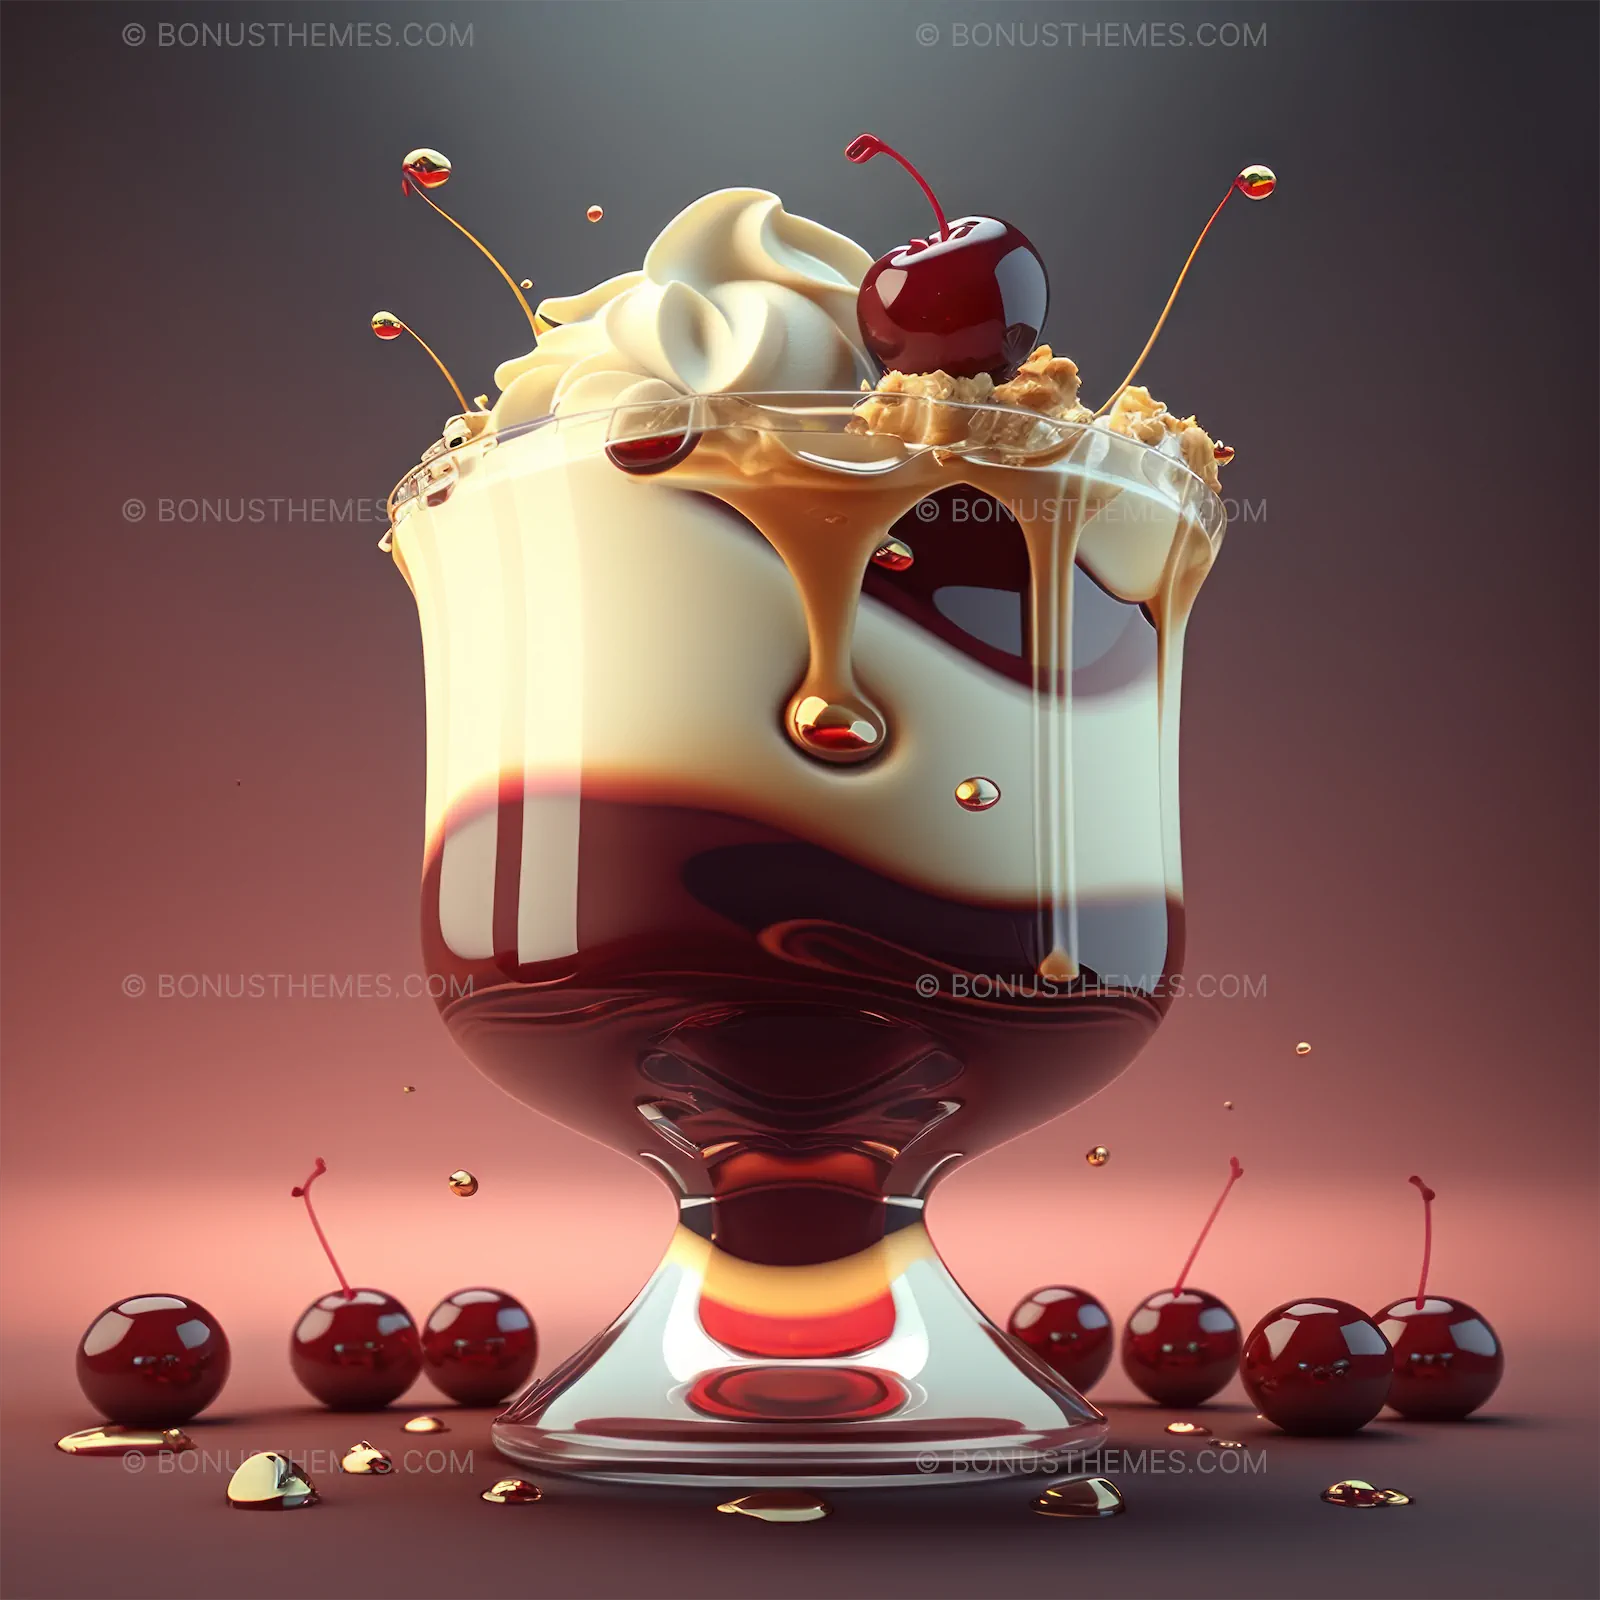 Glass with cream and cherries